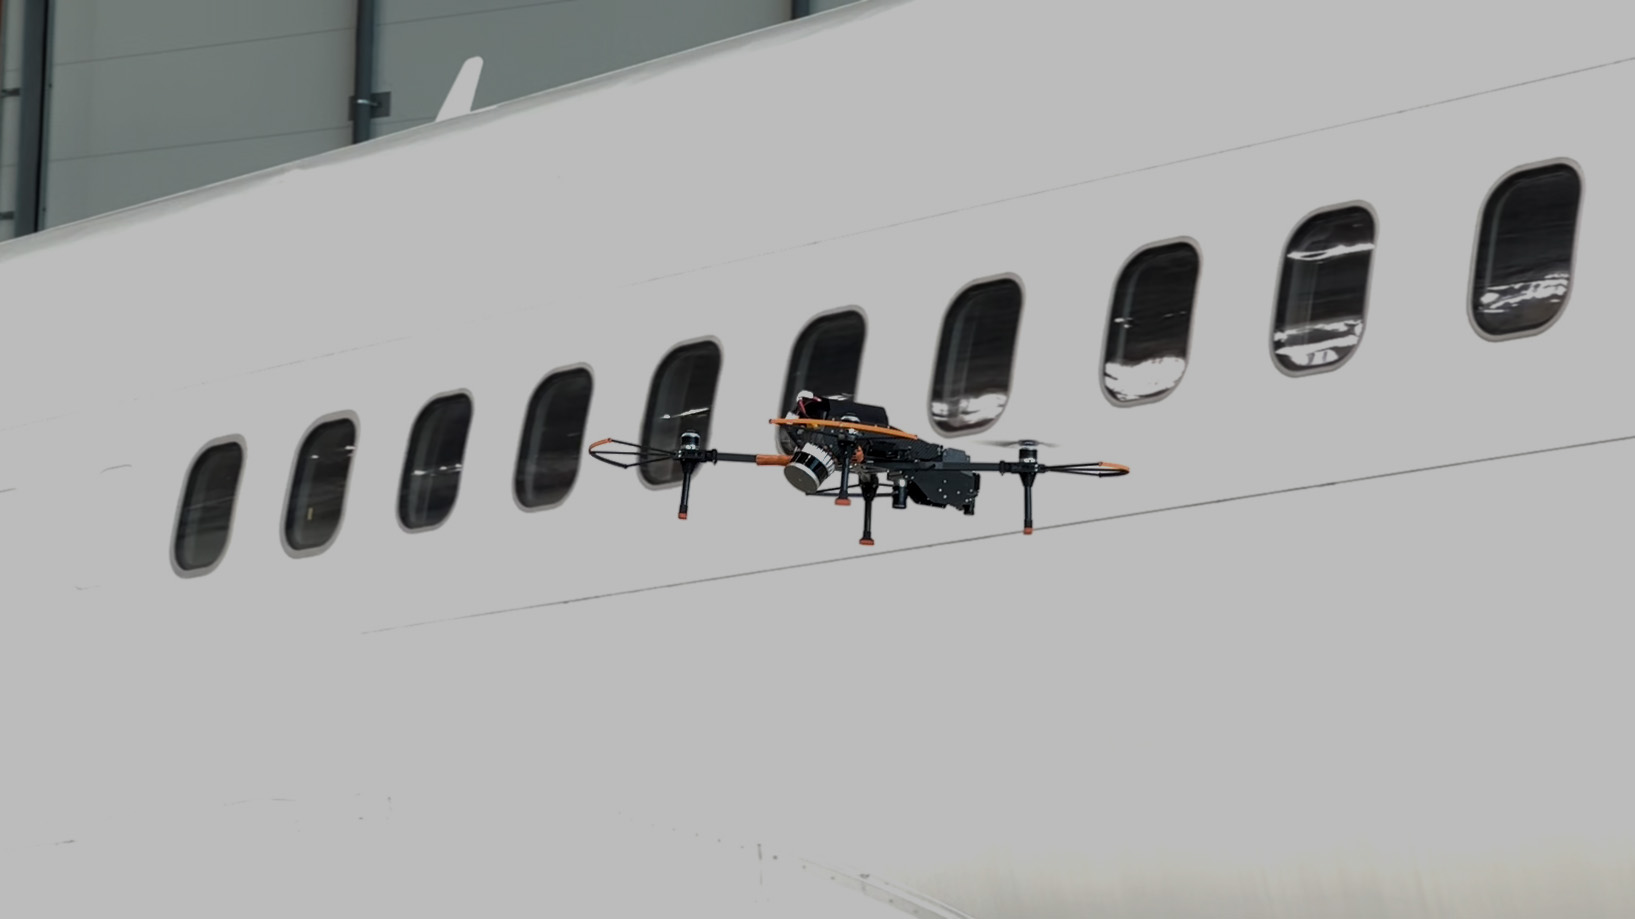 Iris drone during and automated aircraft inspection